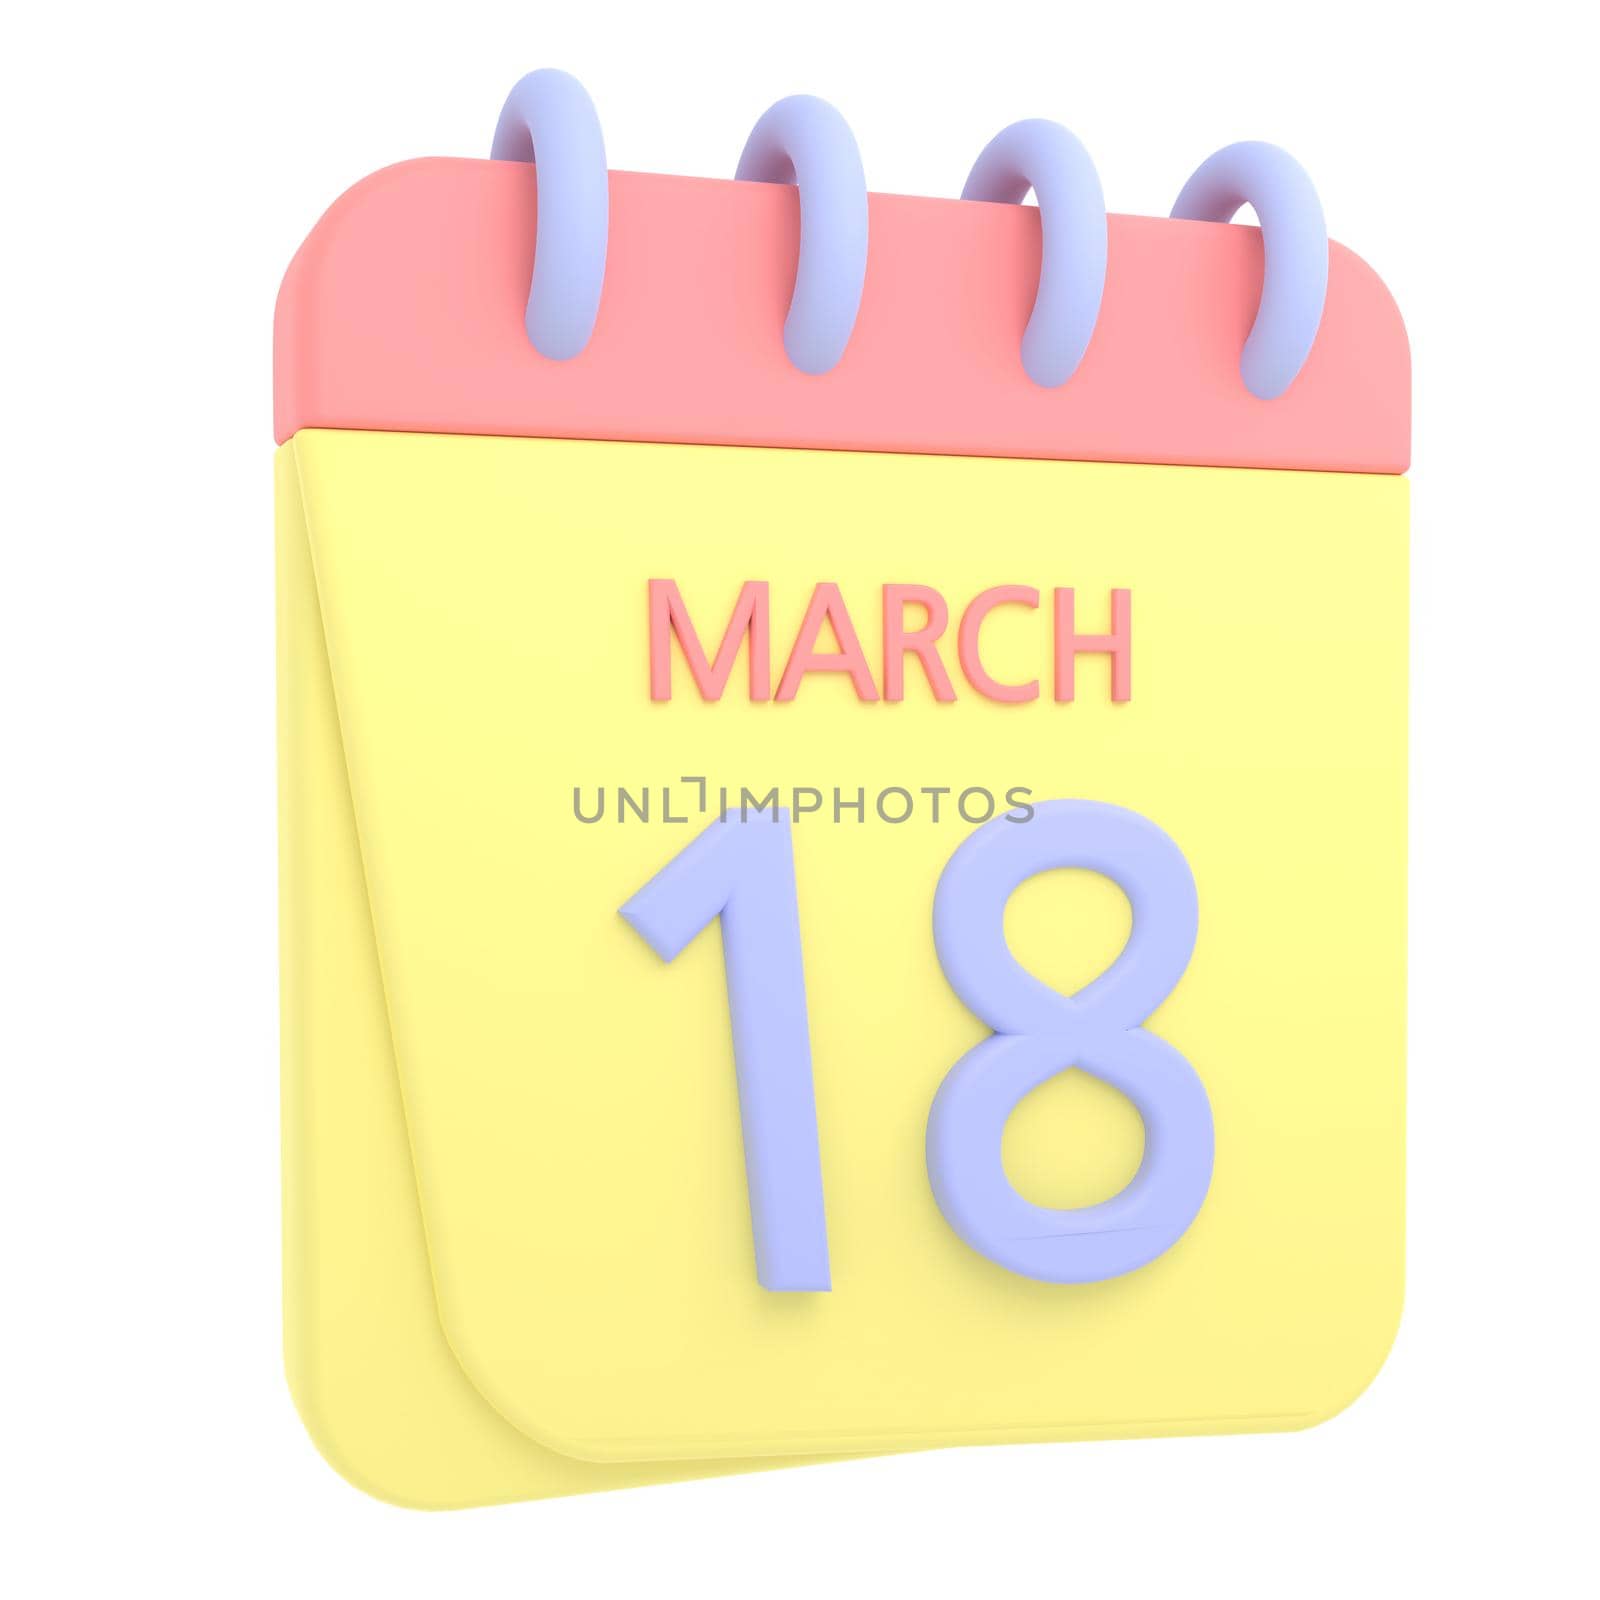 18th March 3D calendar icon. Web style. High resolution image. White background